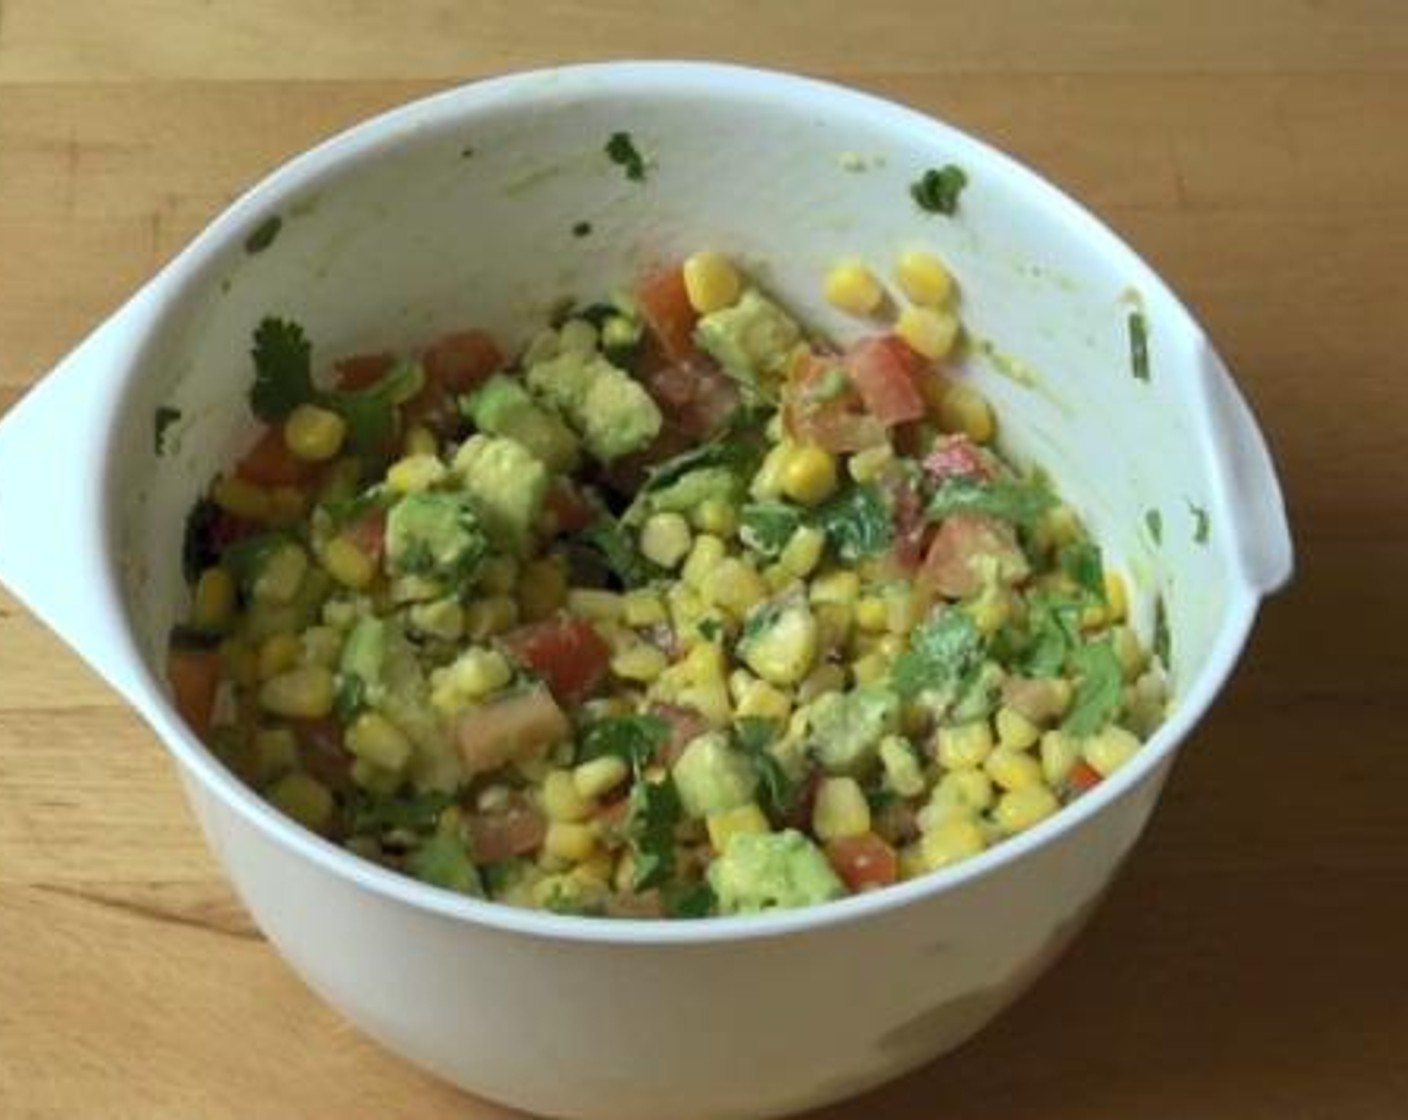 step 1 Into a mixing bowl, add and mix the Corn Kernels (2 1/4 cups), Avocado (1), Fresh Cilantro (1/2 cup), Tomatoes (2), juice from a Lime (1), Salt (to taste) and Ground Black Pepper (to taste). Set aside.